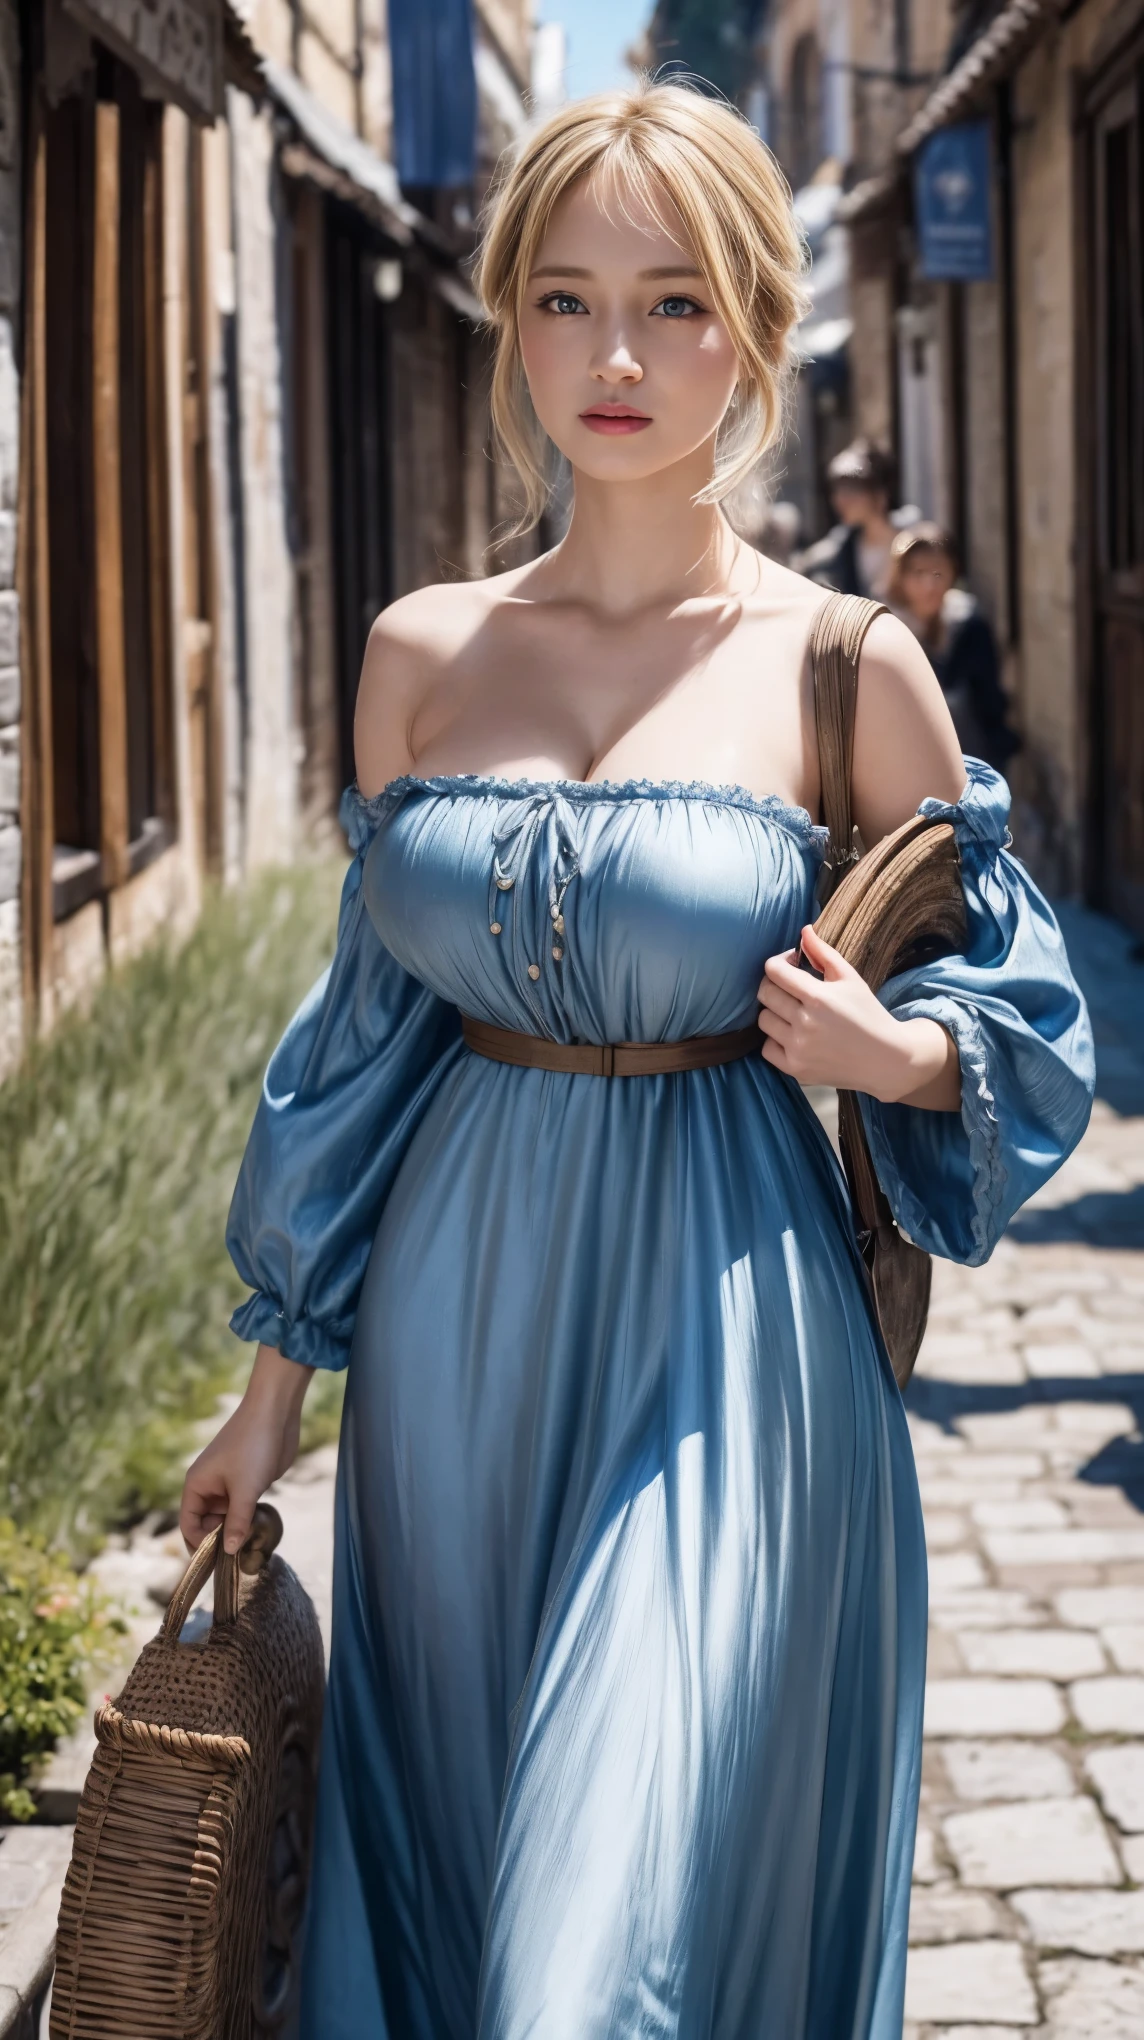 best quality, masterpiece, realistic photo, intricate details, raw photo, ultra detailed, old fashioned young woman, with sexy peasant style dress, no necklines, blonde hair, perfect detailed and blue eyes, walking in an old city, HD quality, 8K, young woman, 20 years old, big breasts, perfect body 